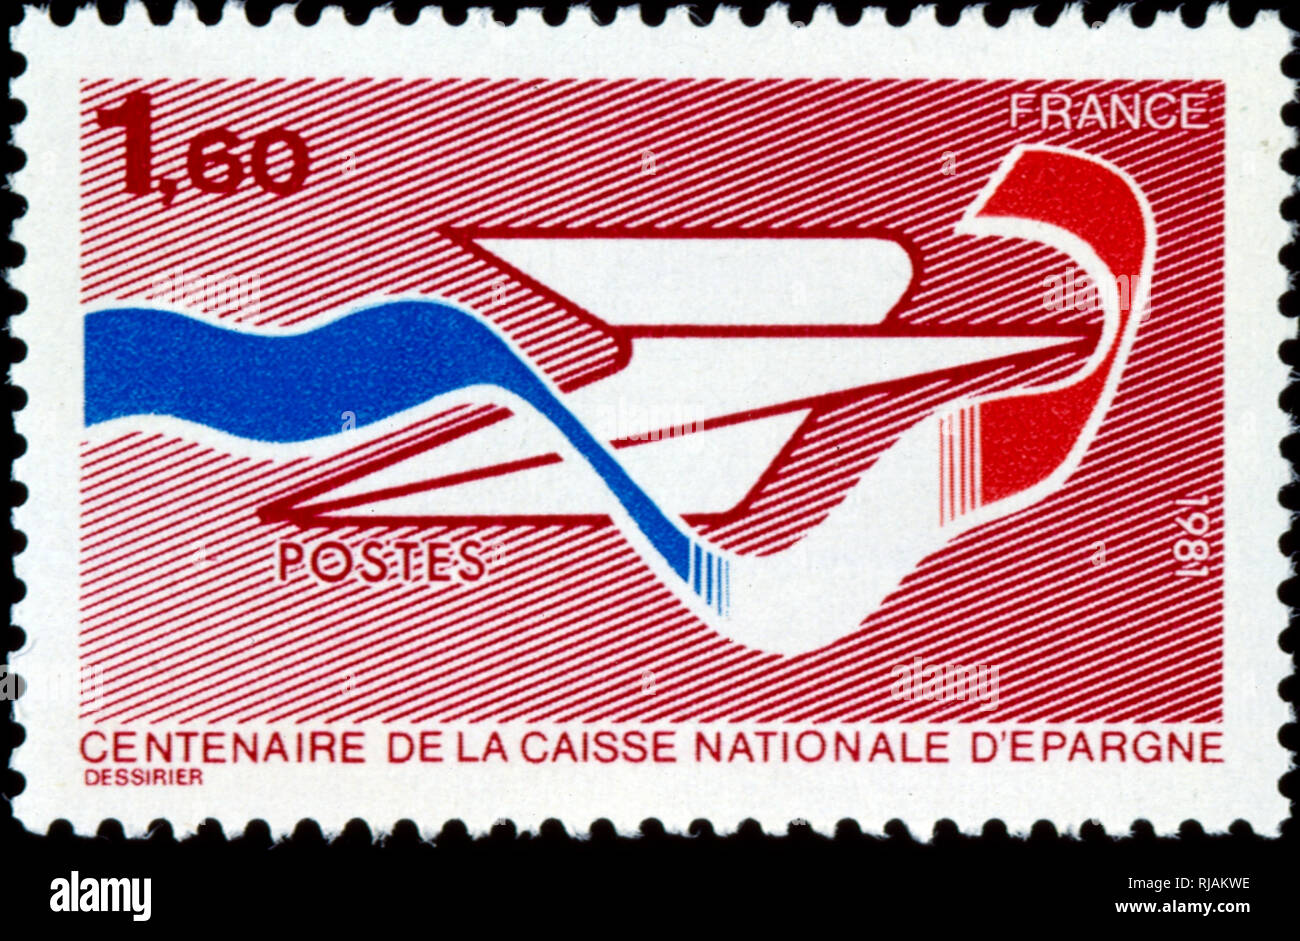 French postage stamp celebrating the centenary of Groupe Caisse d'epargne, a French semi-cooperative banking group, founded in 1818, Stock Photo